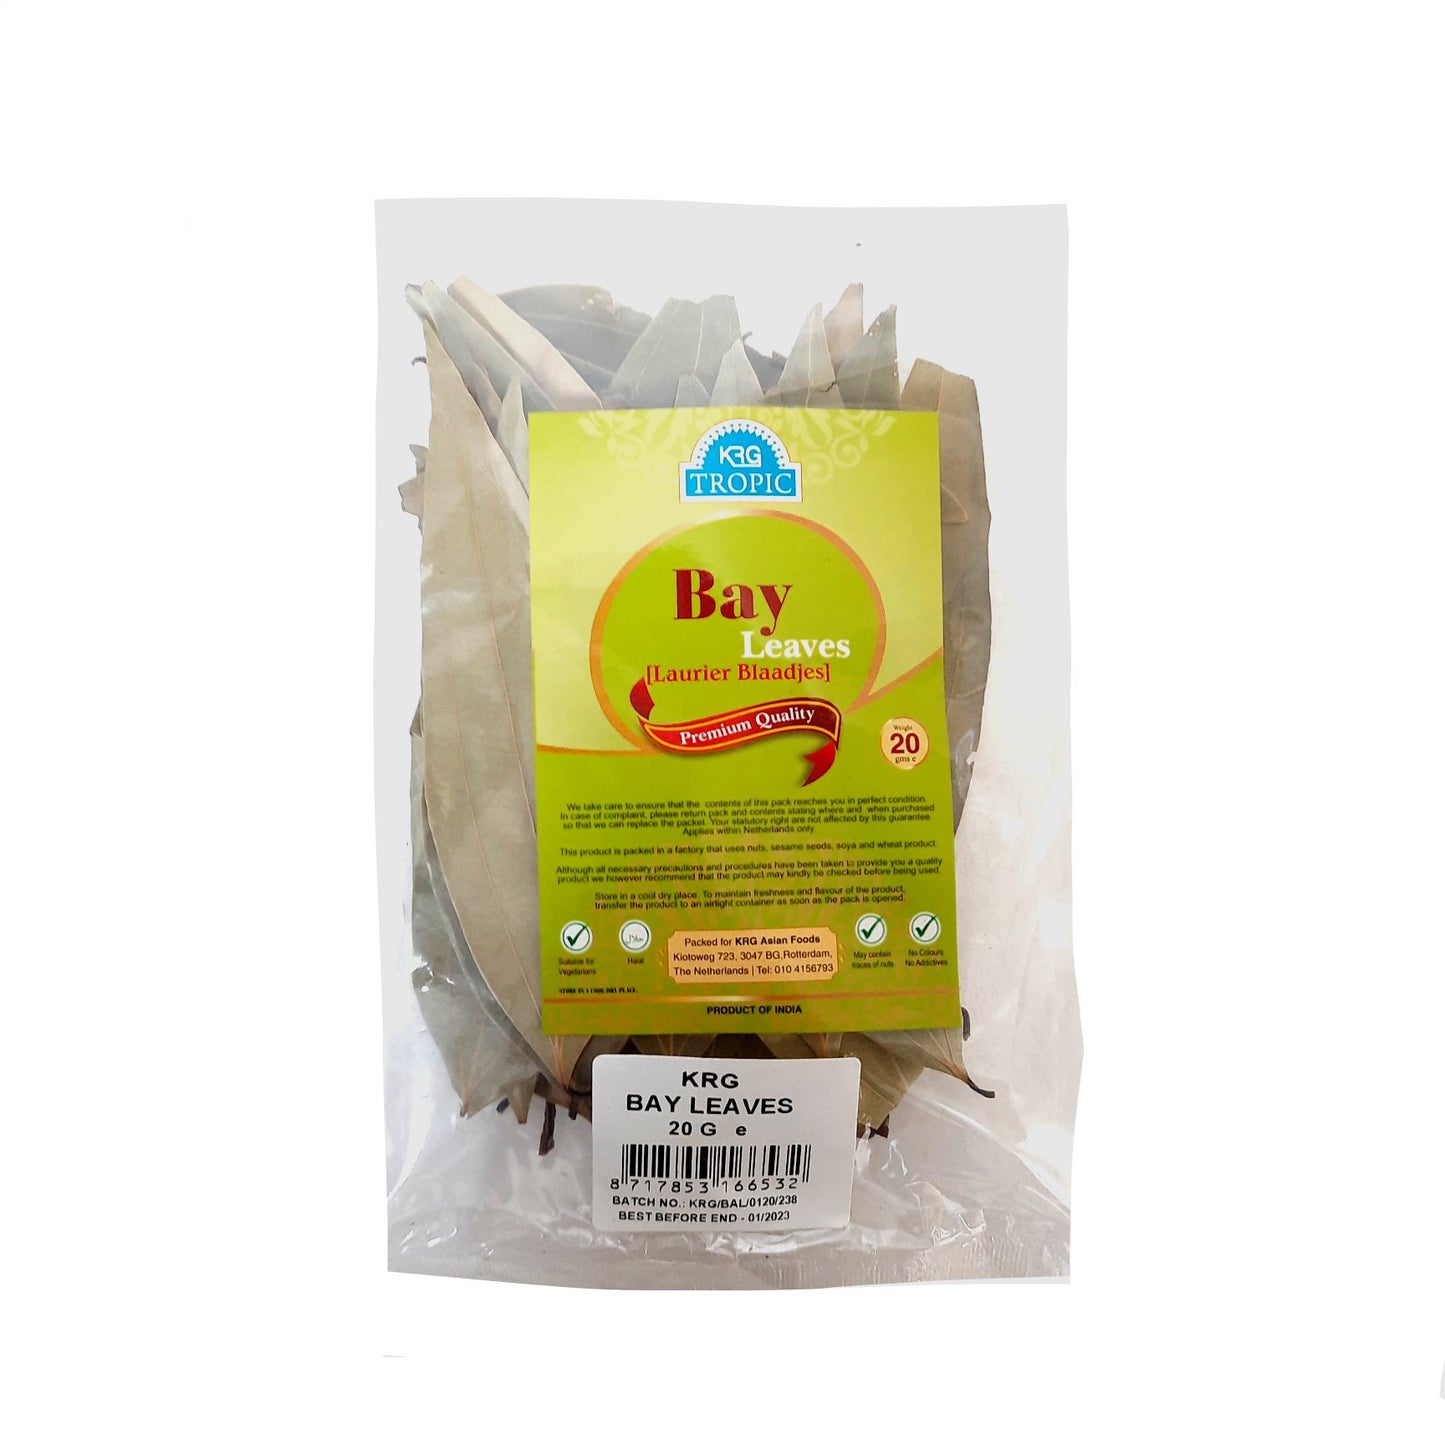 Tropic Bay Leaves 20g - Cestaa Retail